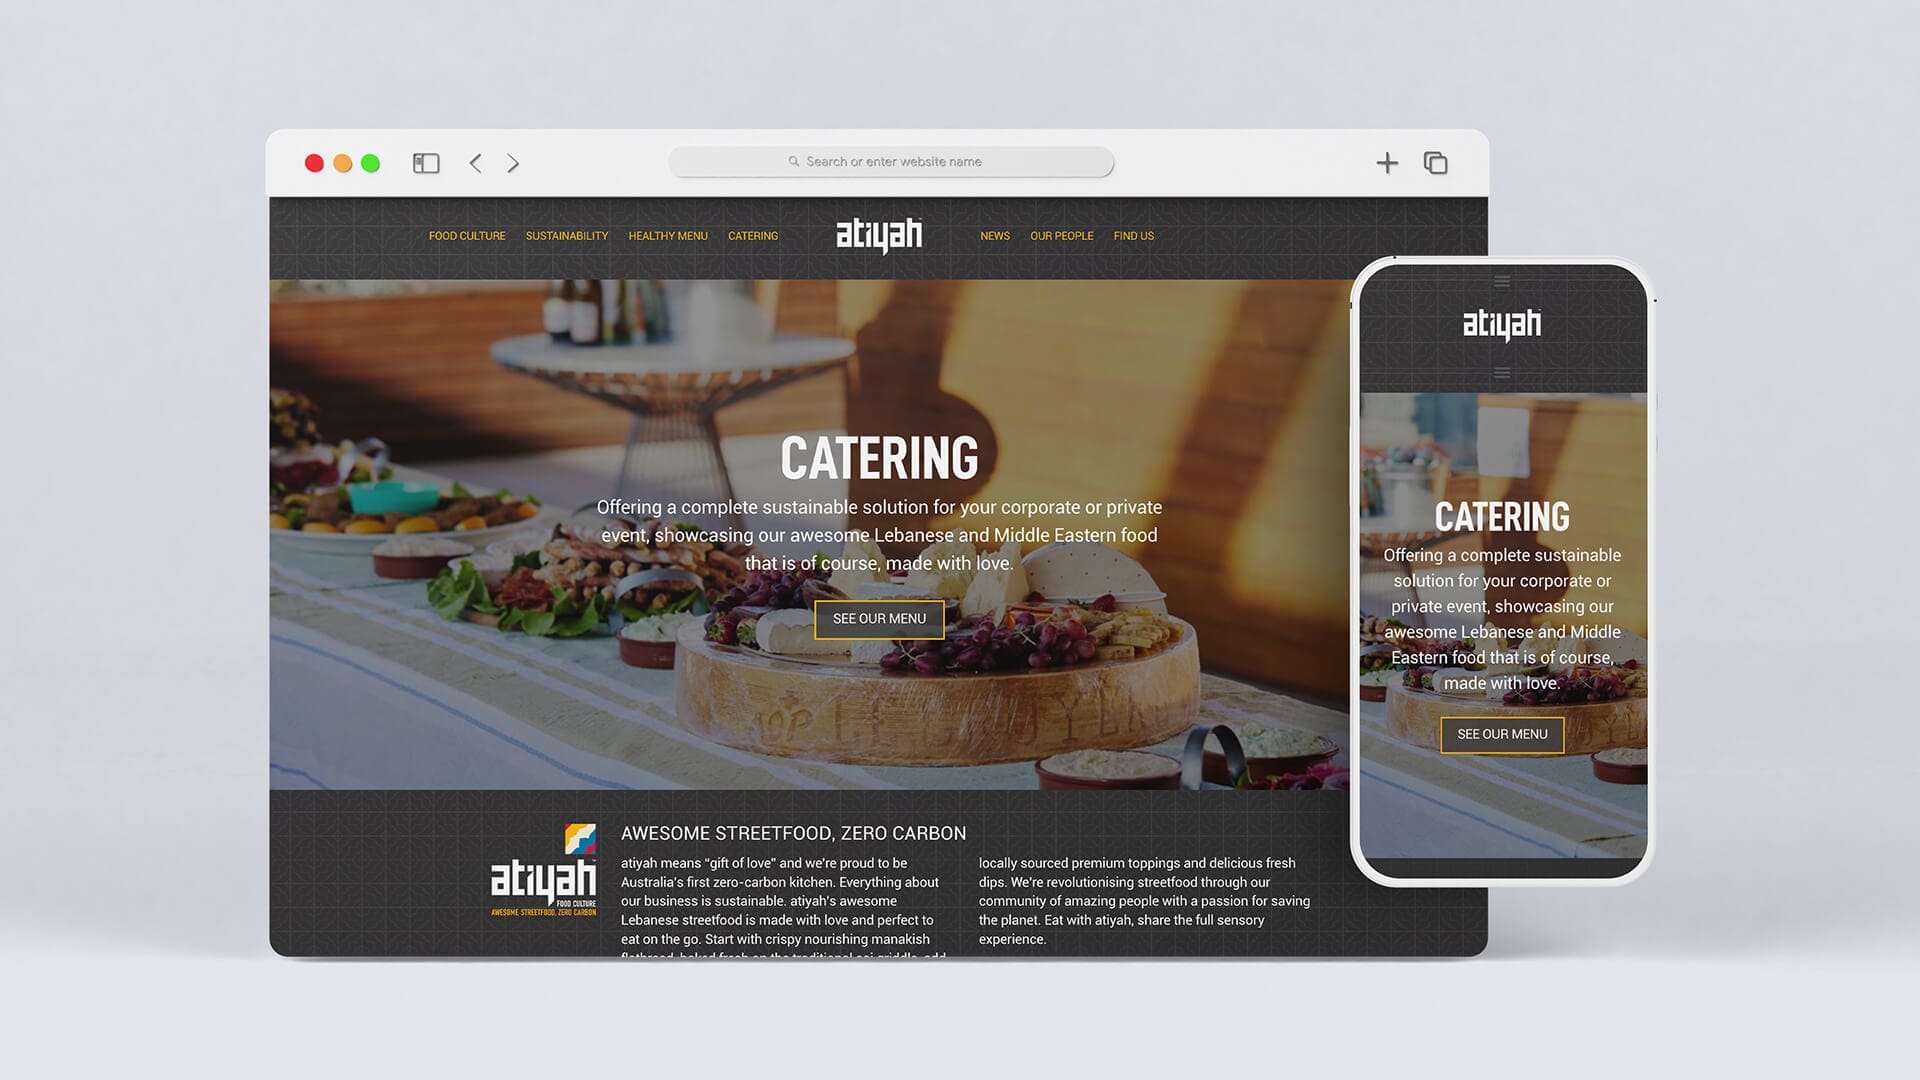 Atiyah - Portfolio presentation showing the catering website page